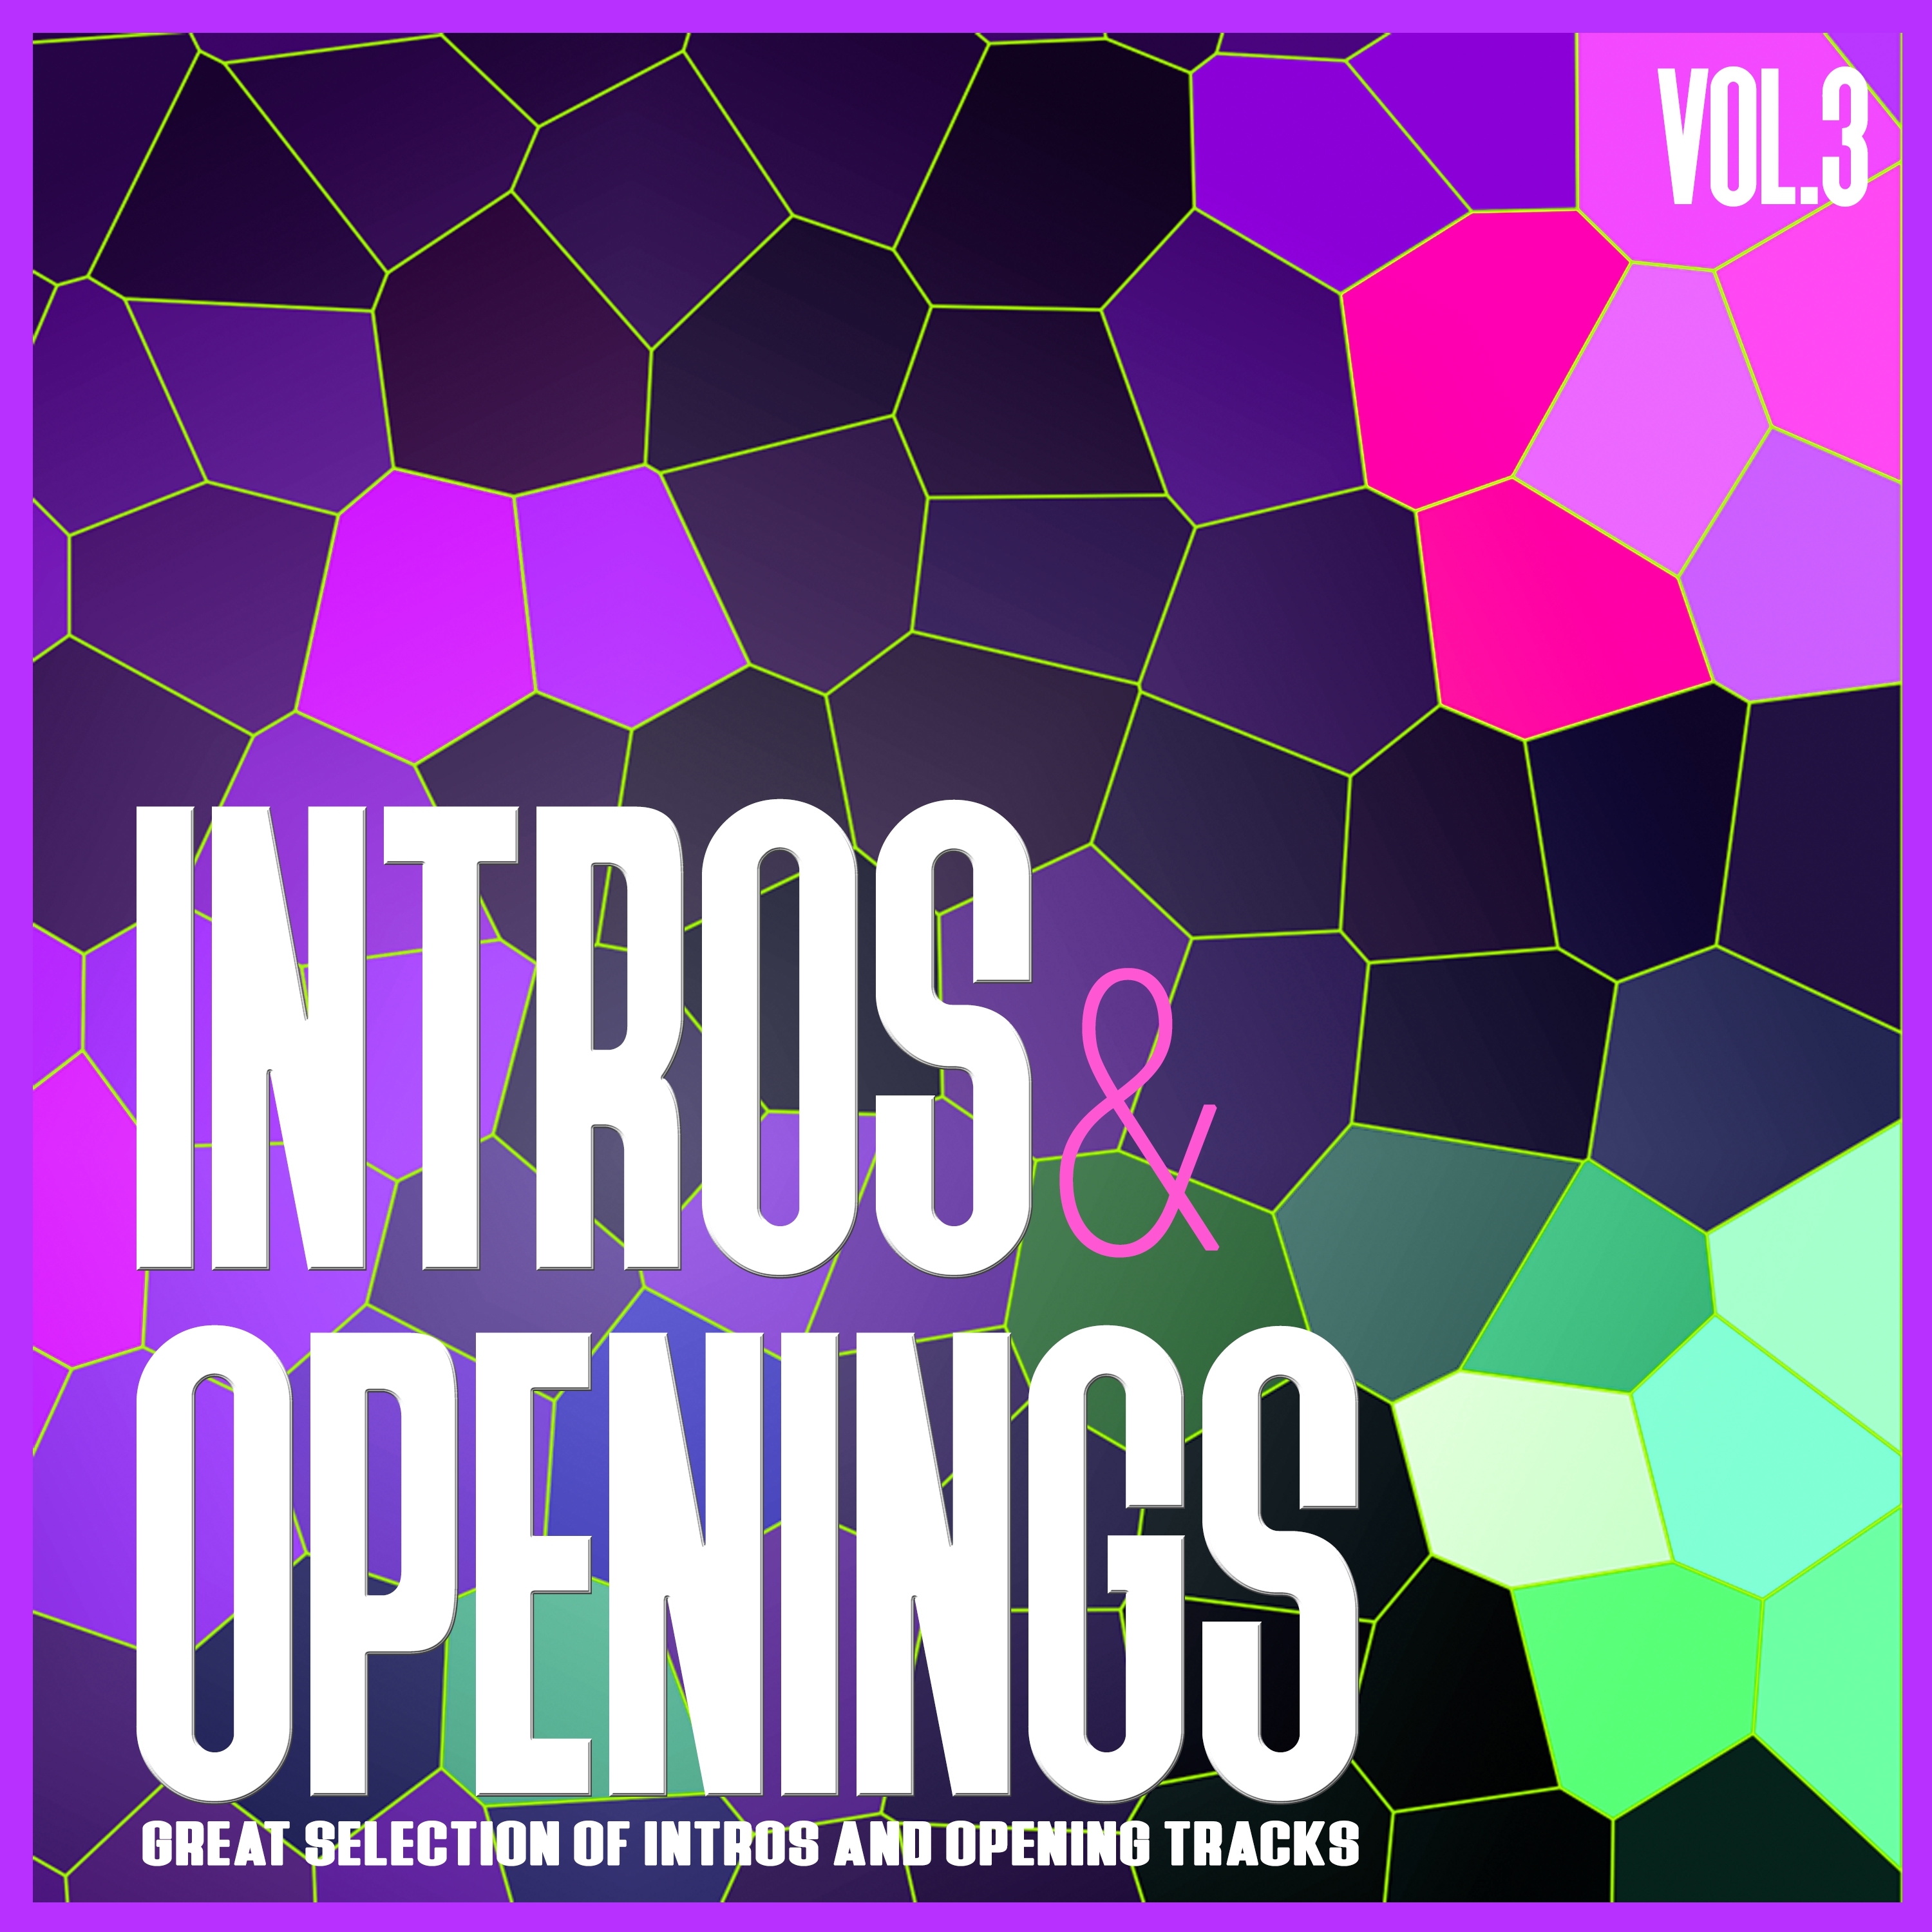 Intros & Openings, Vol. 3 - Great Selection of Intros and Opening Tracks